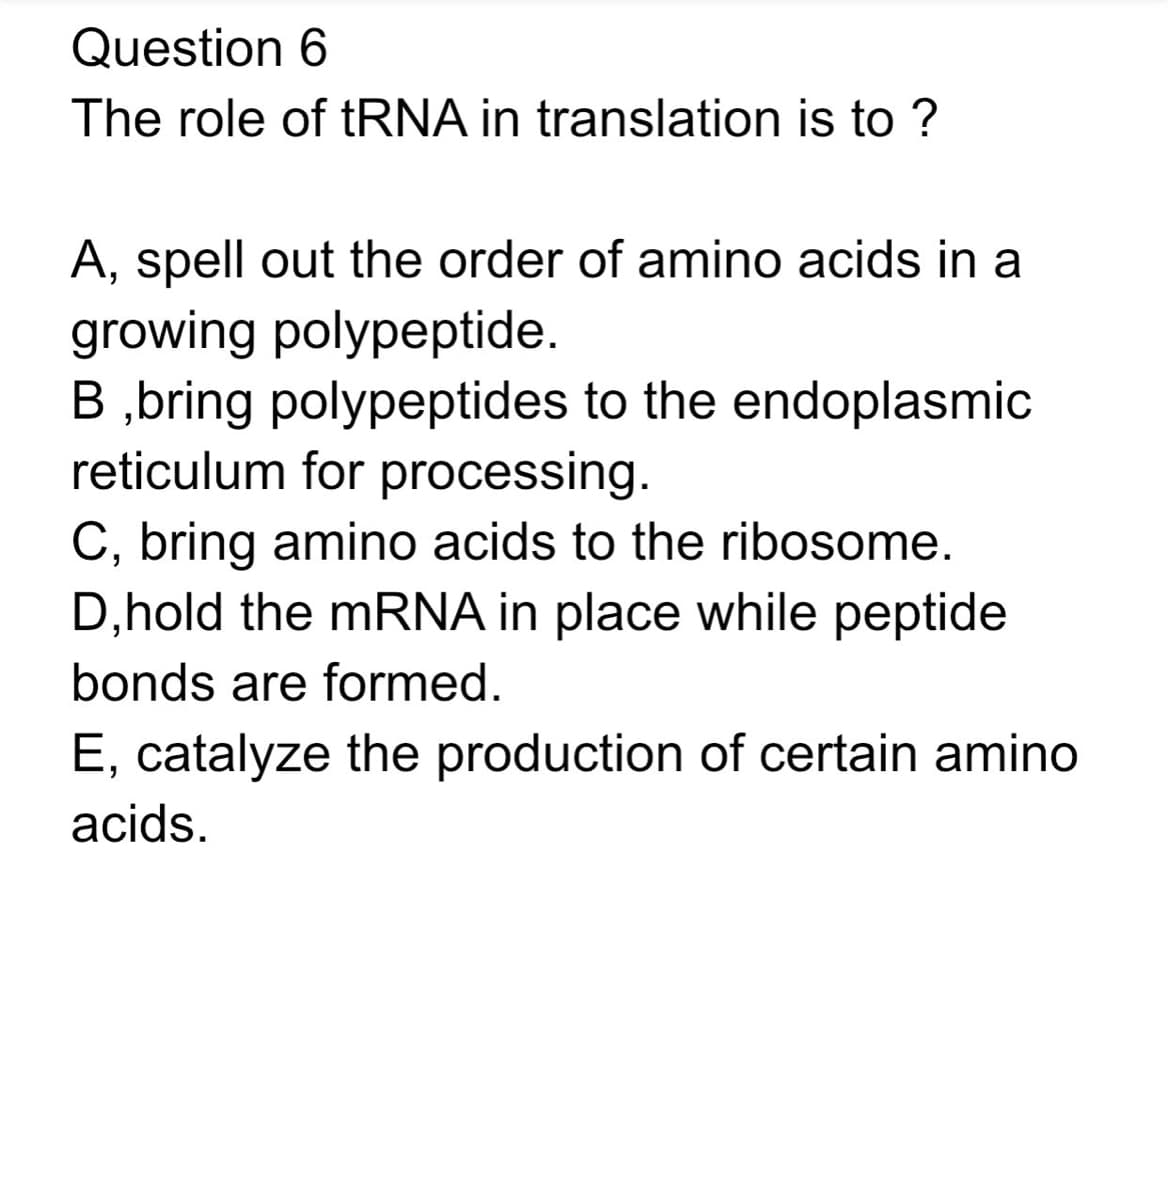 Question 6
The role of tRNA in translation is to ?
A, spell out the order of amino acids in a
growing polypeptide.
B ,bring polypeptides to the endoplasmic
reticulum for processing.
C, bring amino acids to the ribosome.
D, hold the mRNA in place while peptide
bonds are formed.
E, catalyze the production of certain amino
acids.